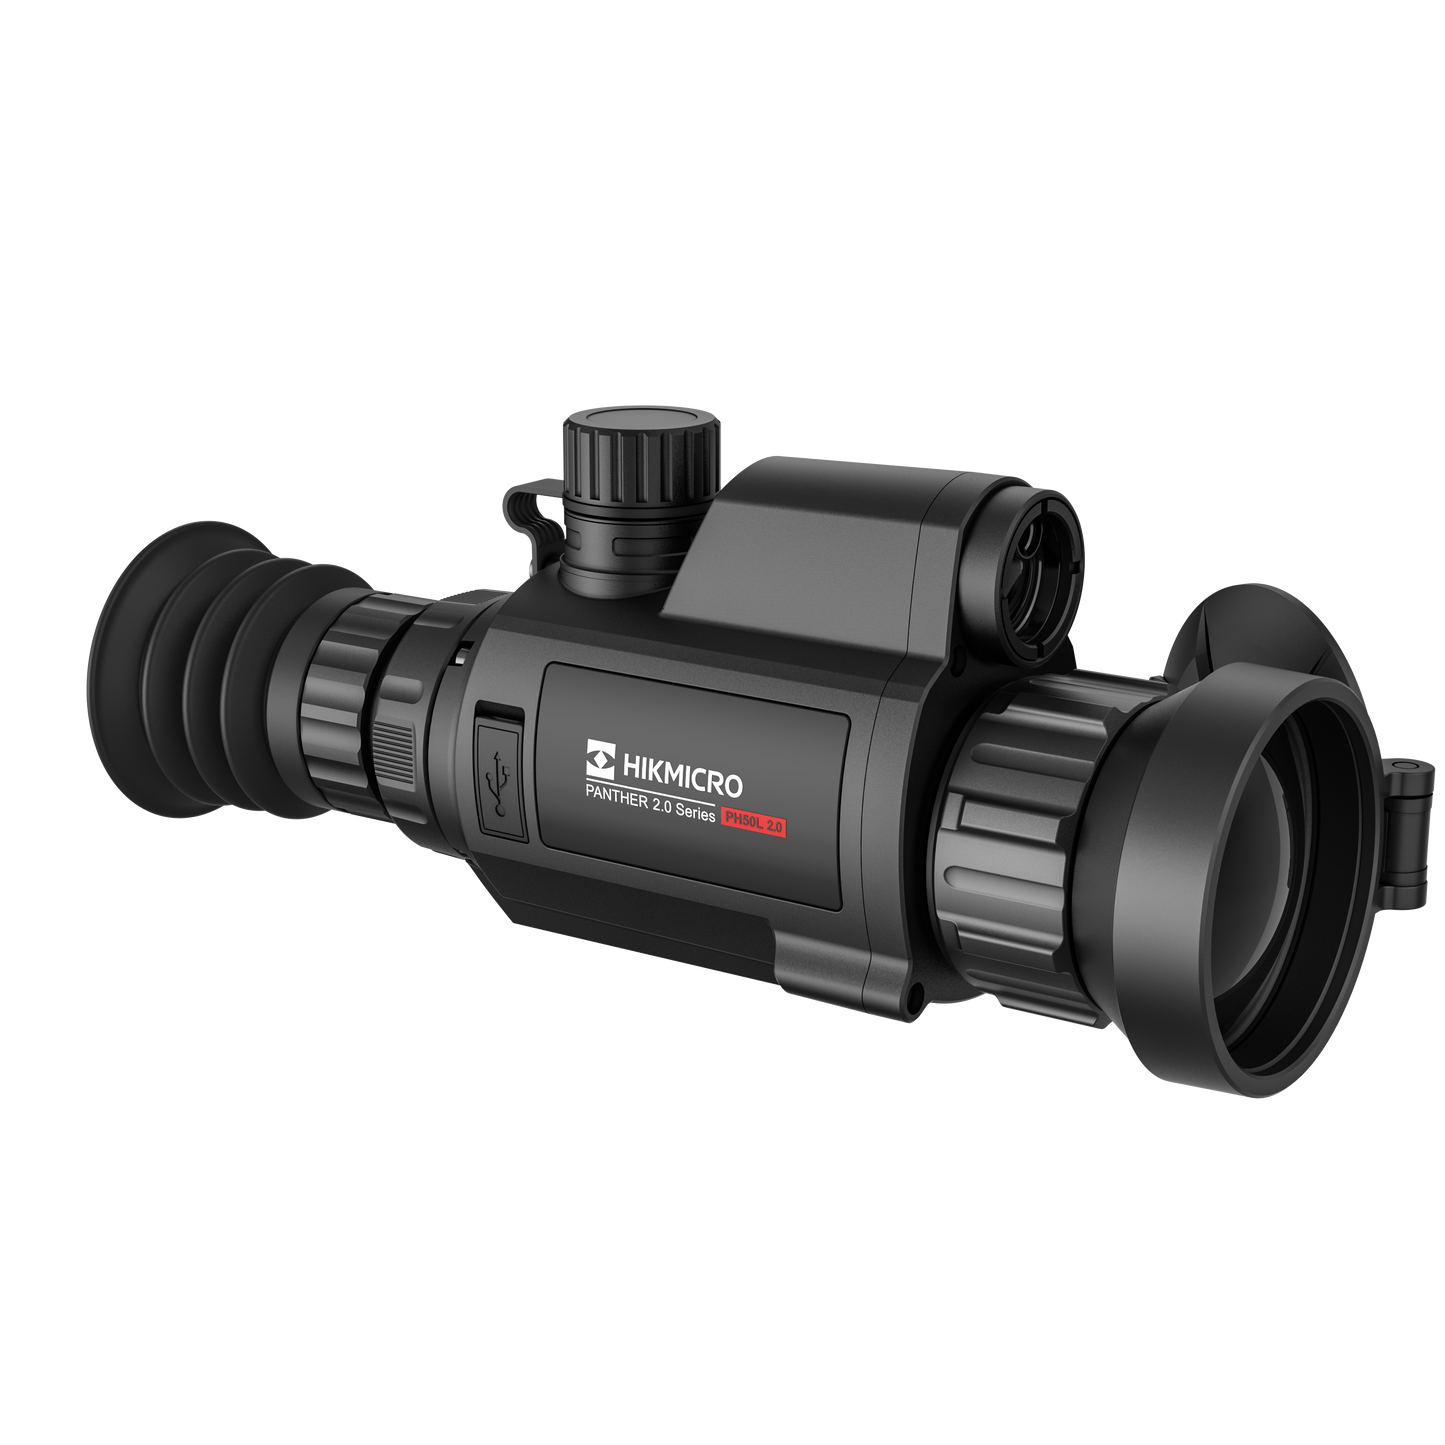 Hikmicro Panther 2.0 PQ50L Thermal Scope